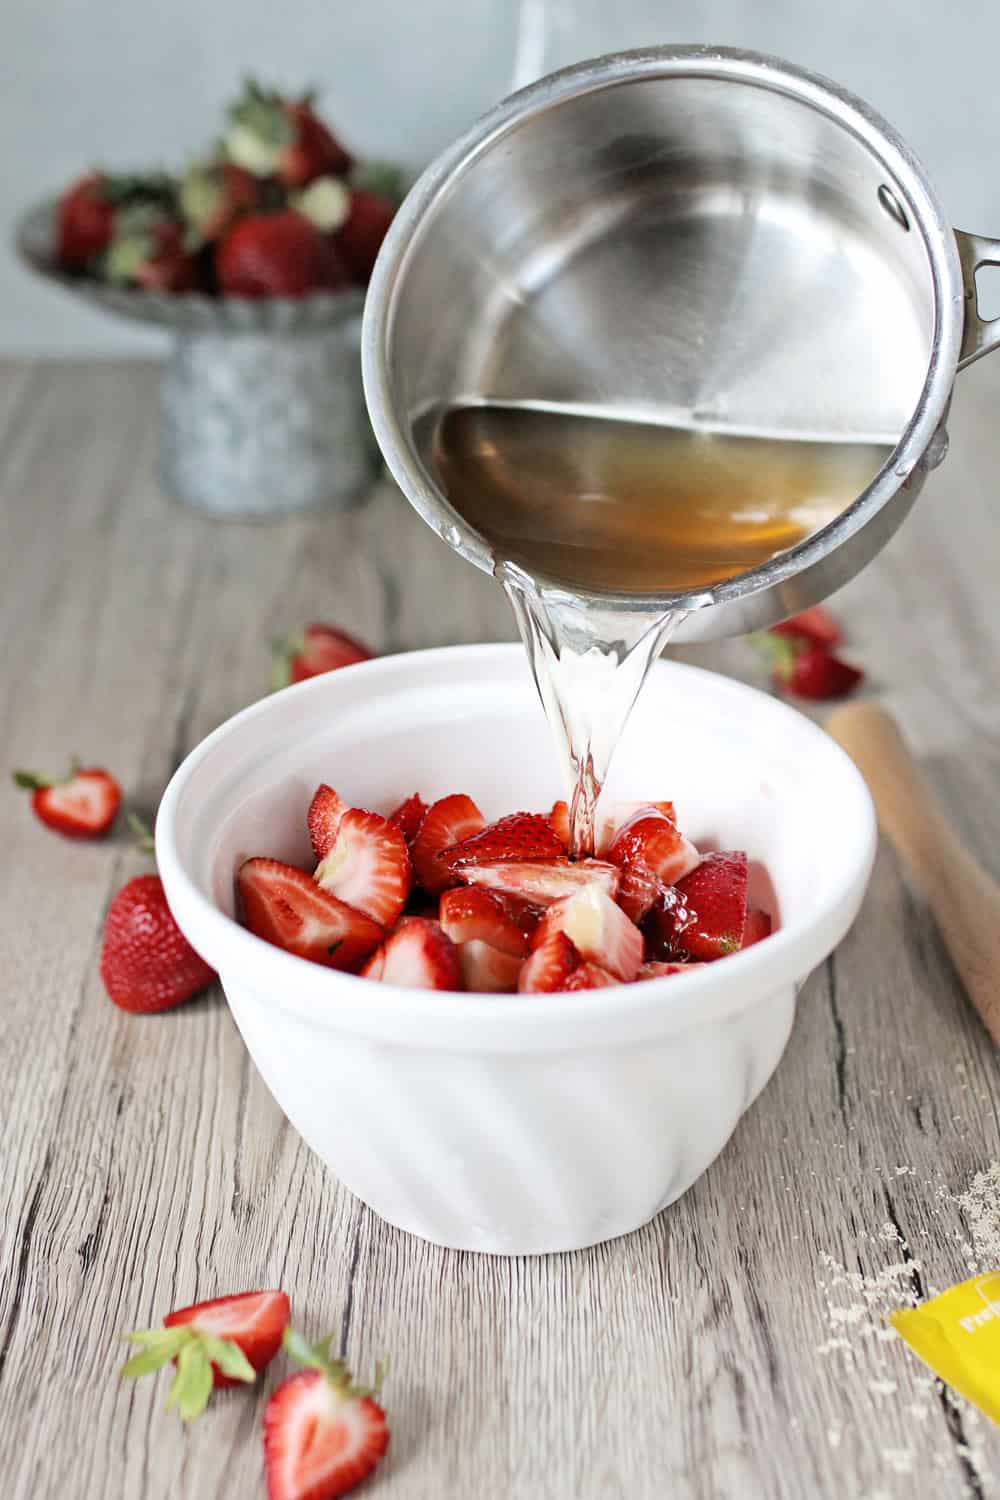 2 Simple Ways to Get Your Probiotic Fix (+ a Fermented Strawberry Soda Recipe)